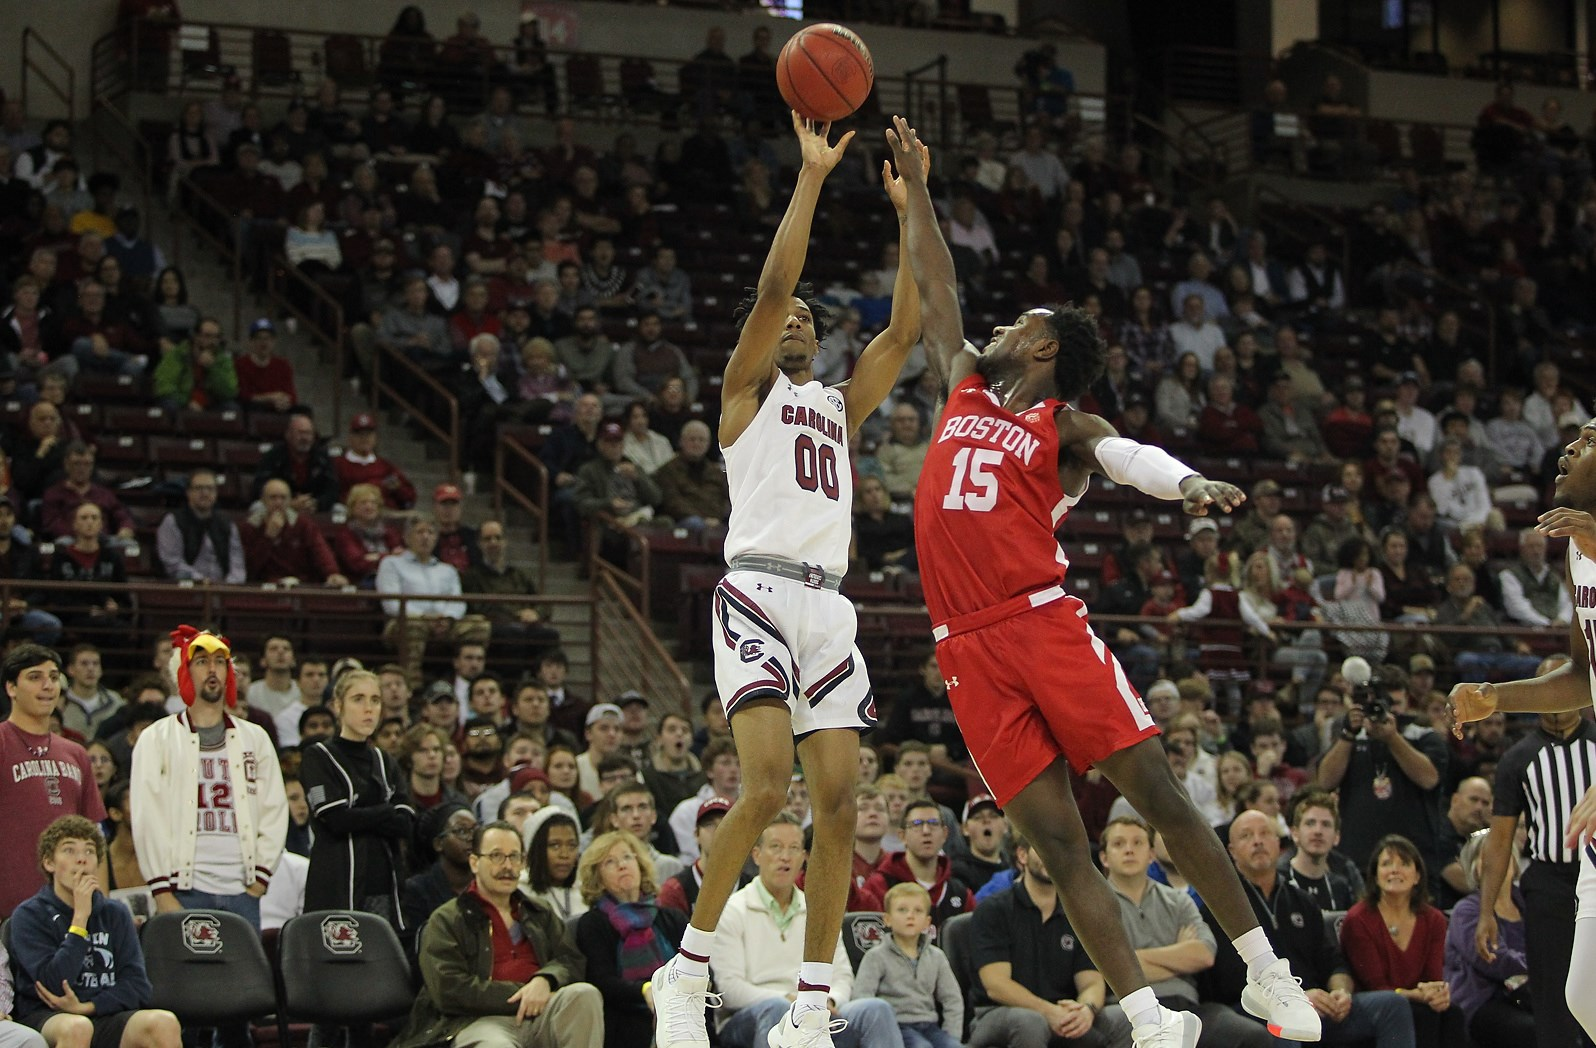 Gamecocks Handed First Loss, 78-70, by BU